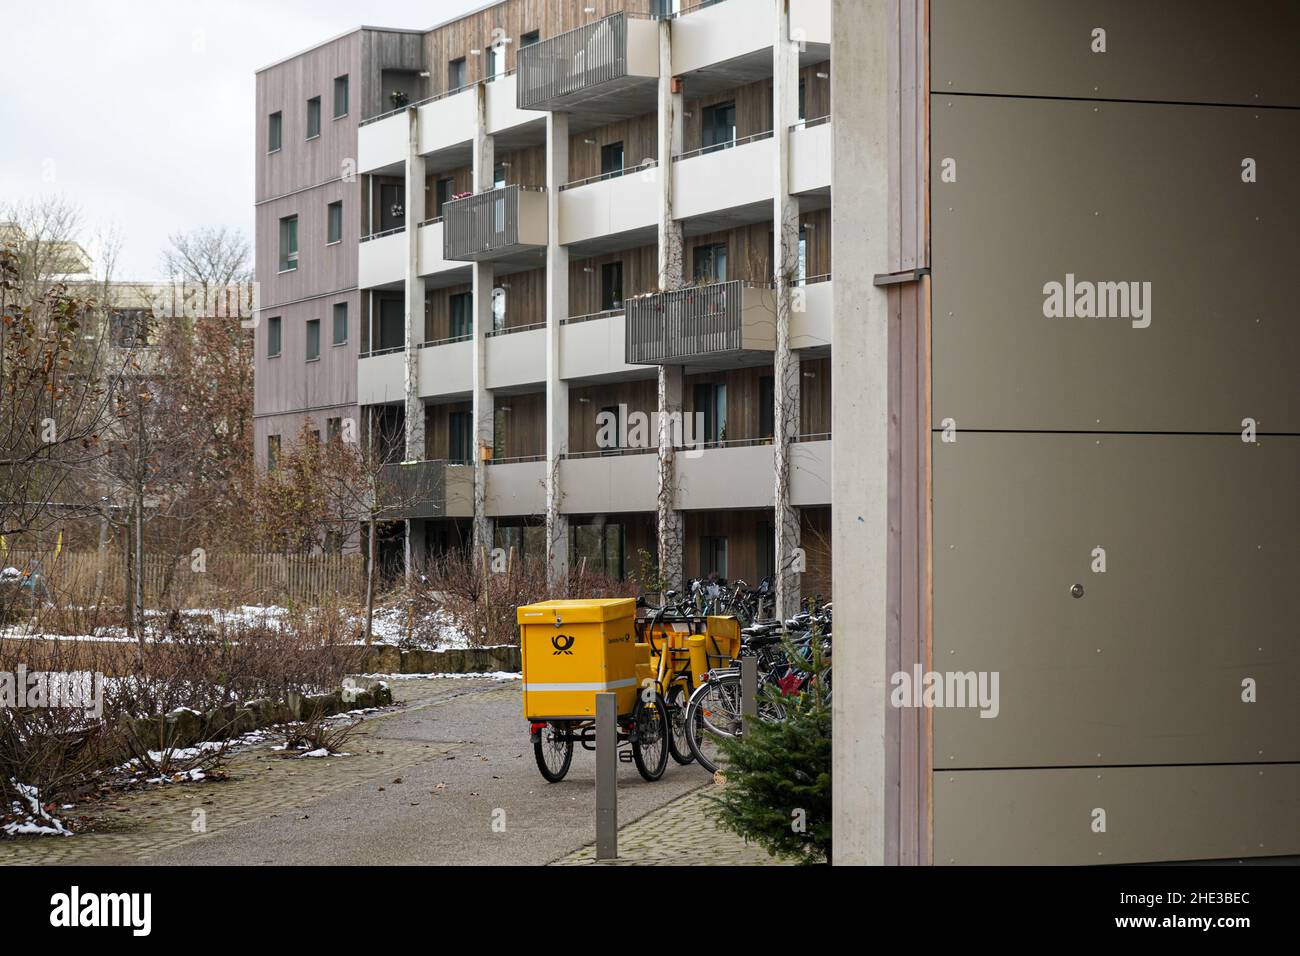 Bicycle of a DHL postal worker in front of a residential building. Stock Photo